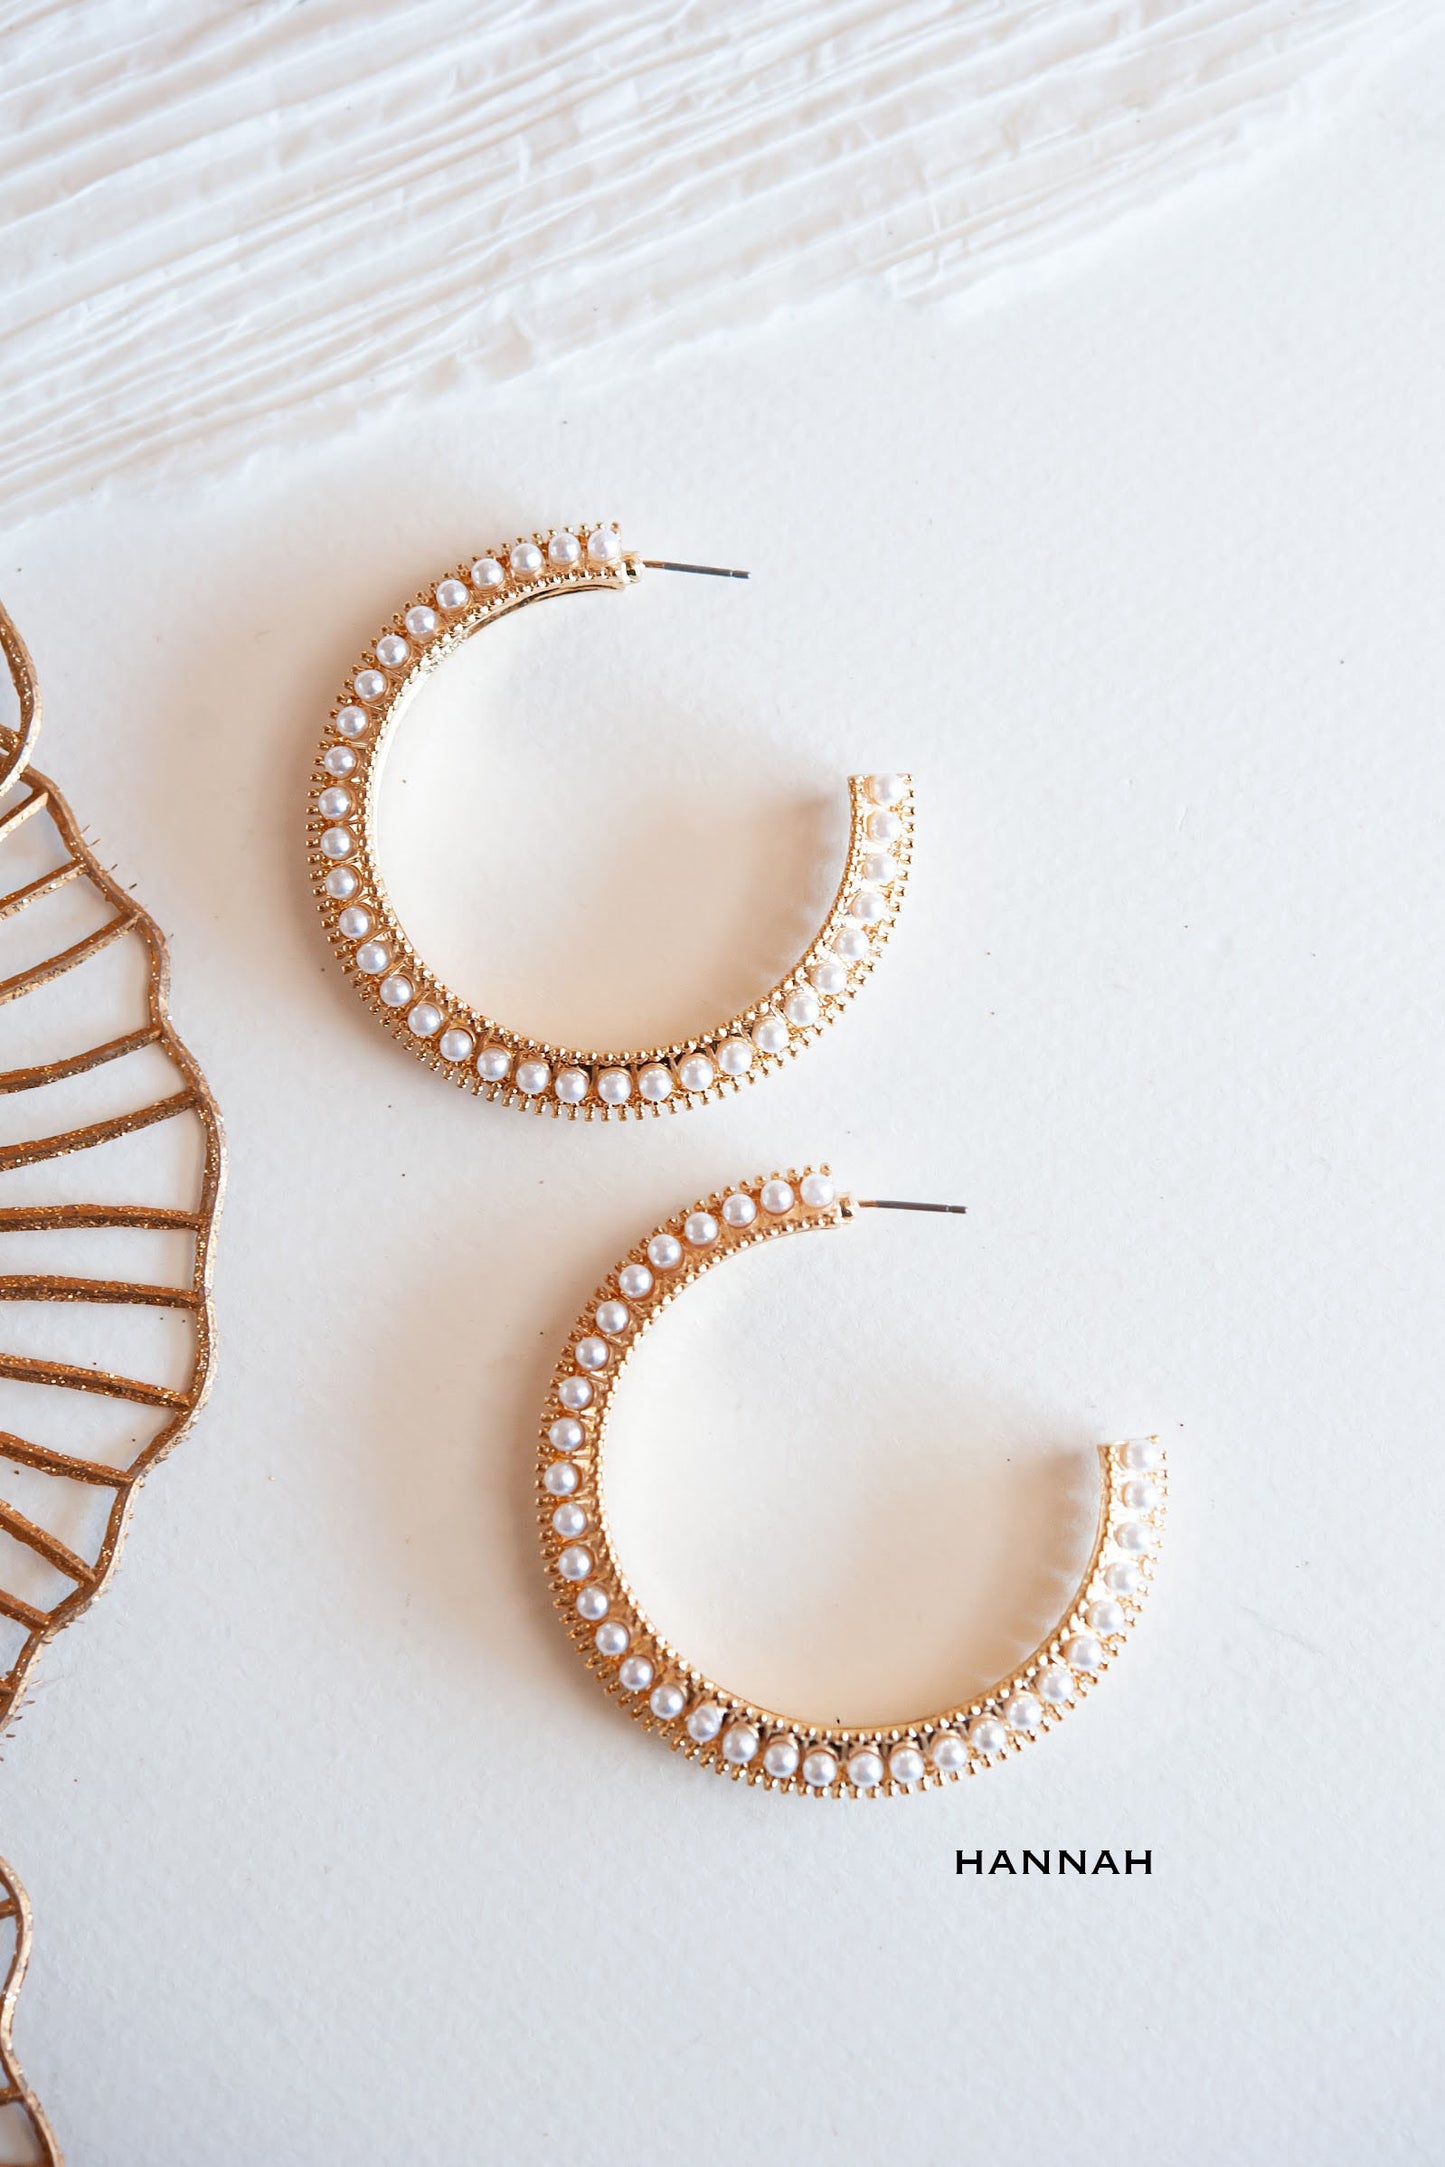 Pearl Earrings | Modern Pearl and Gold Hoops With Crystals | White Earrings